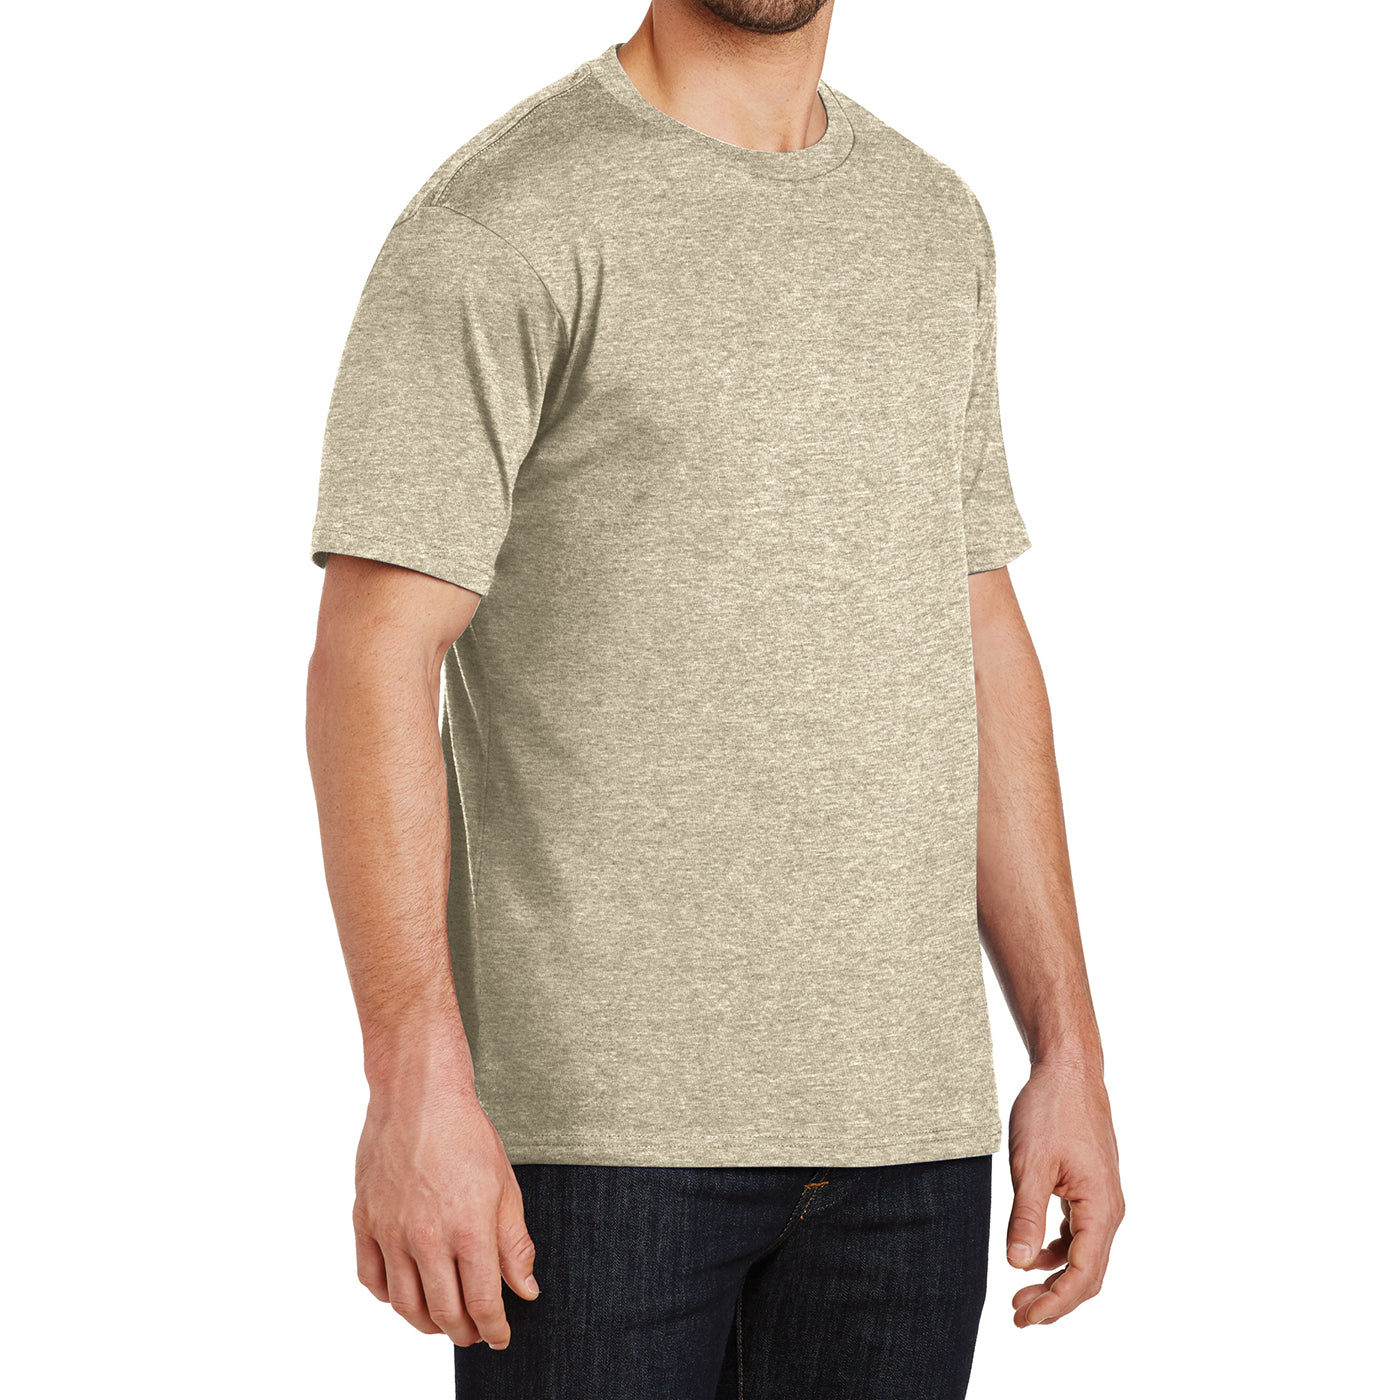 Mens Perfect Weight Crew Tee - Heathered Latte - Side